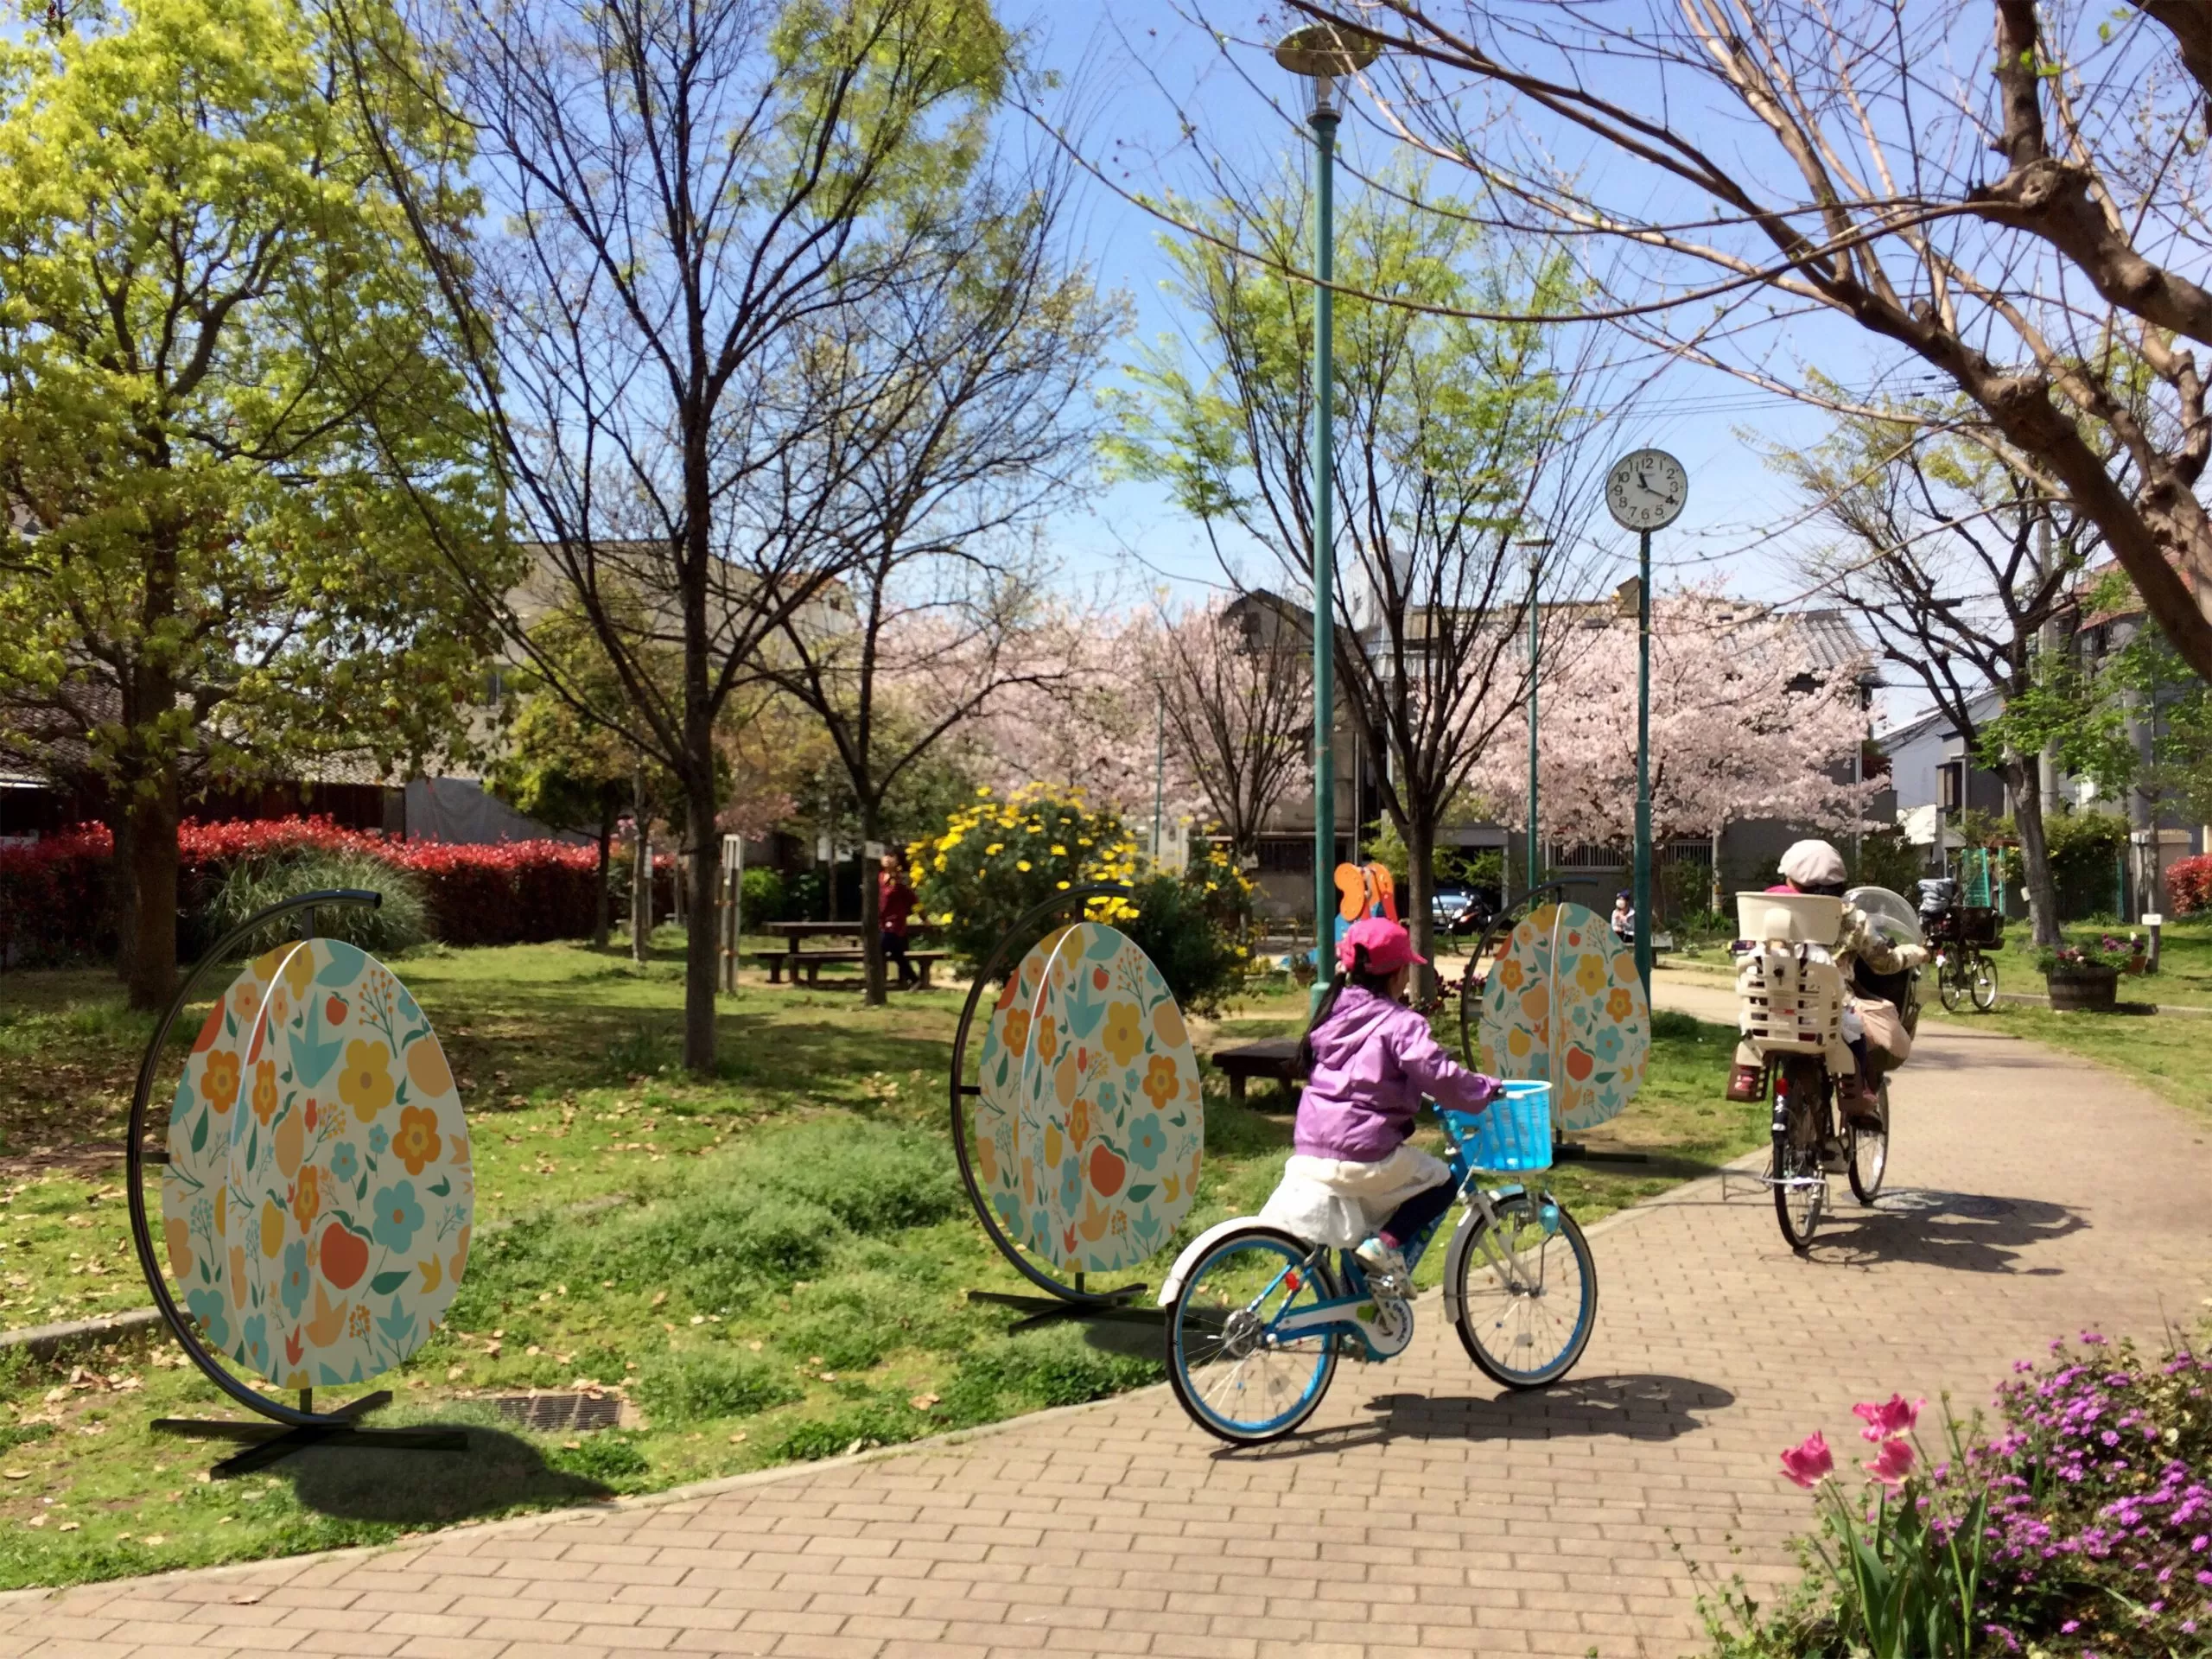 Easter decorations in a city park